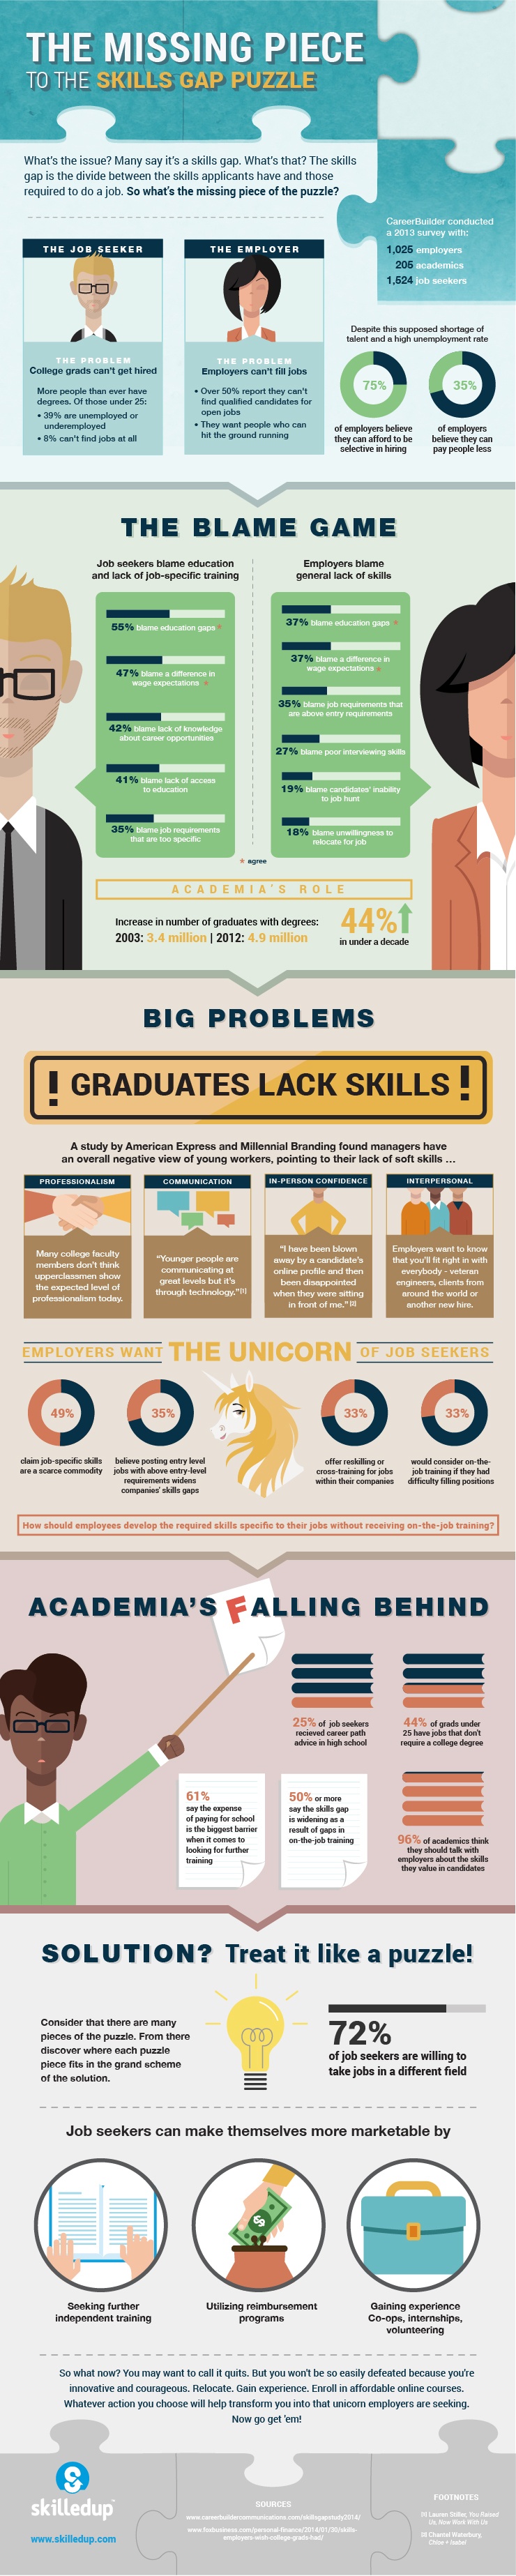 The Missing Piece to the Skills Gap Puzzle Infographic